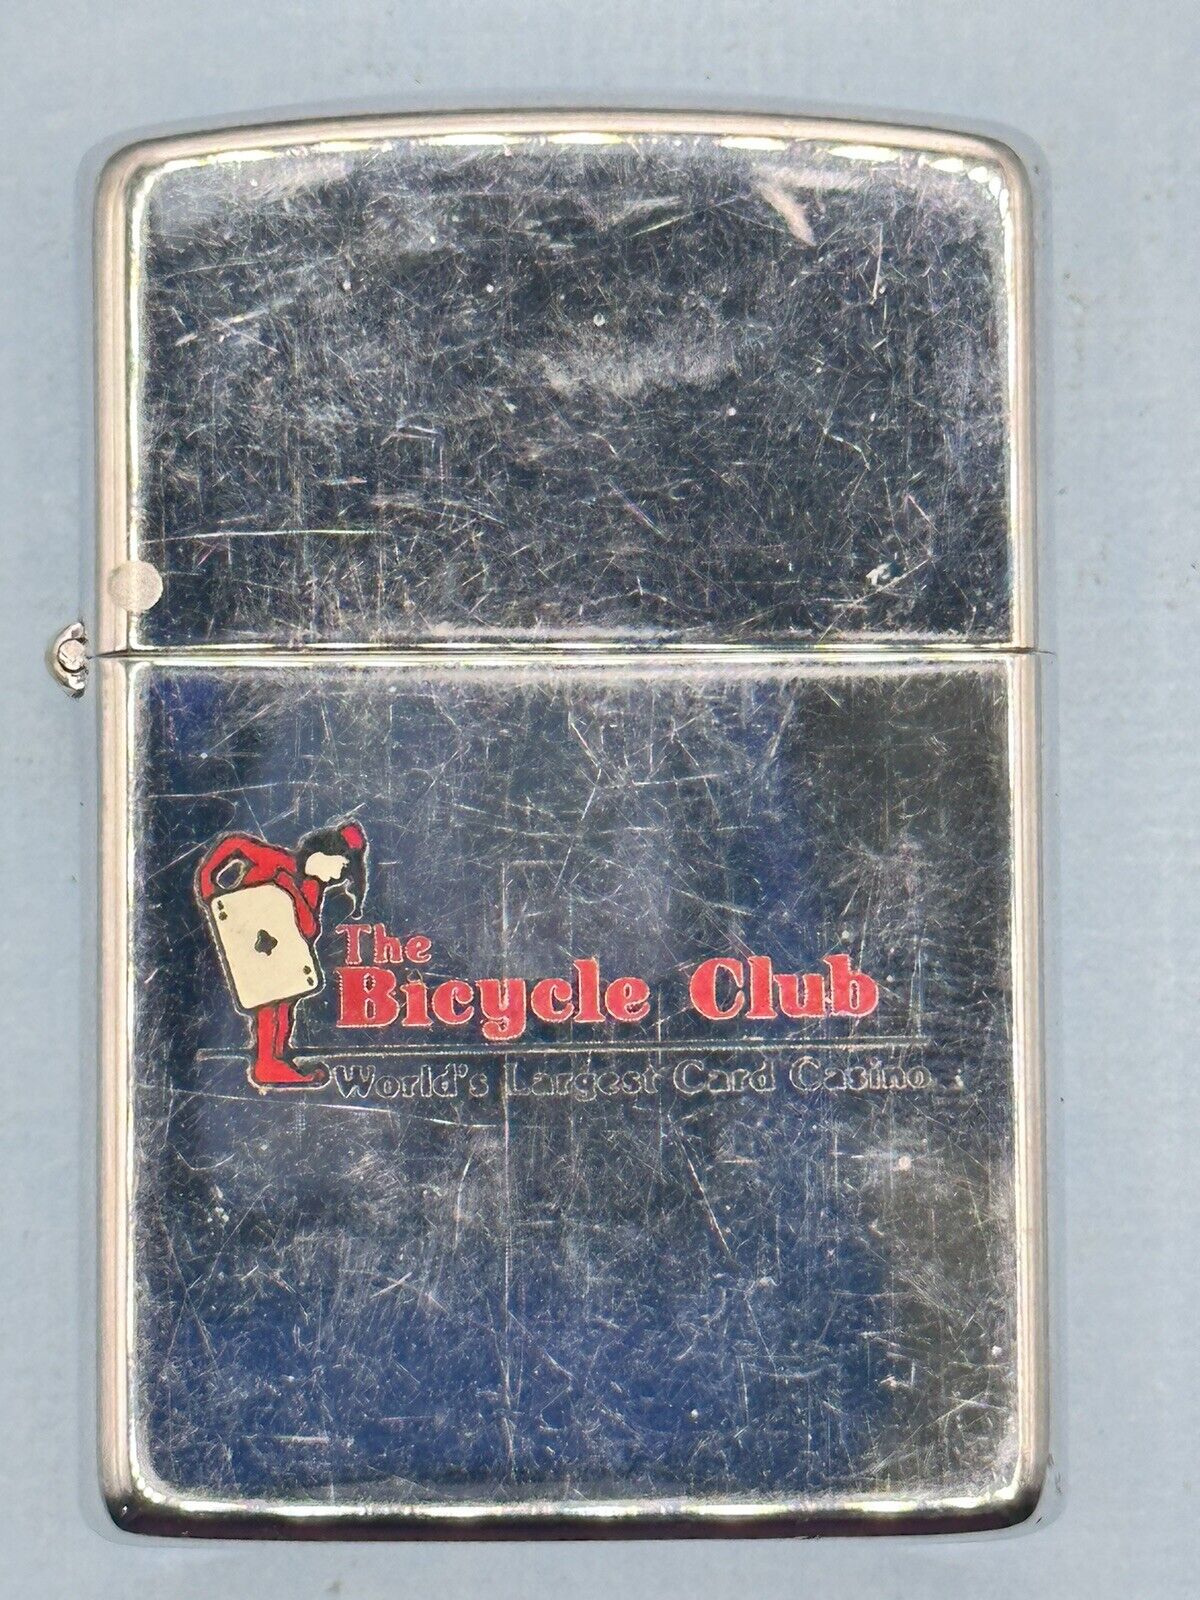 Vintage 1990 The Bicycle Club Card Casino Advertising Chrome Zippo Lighter